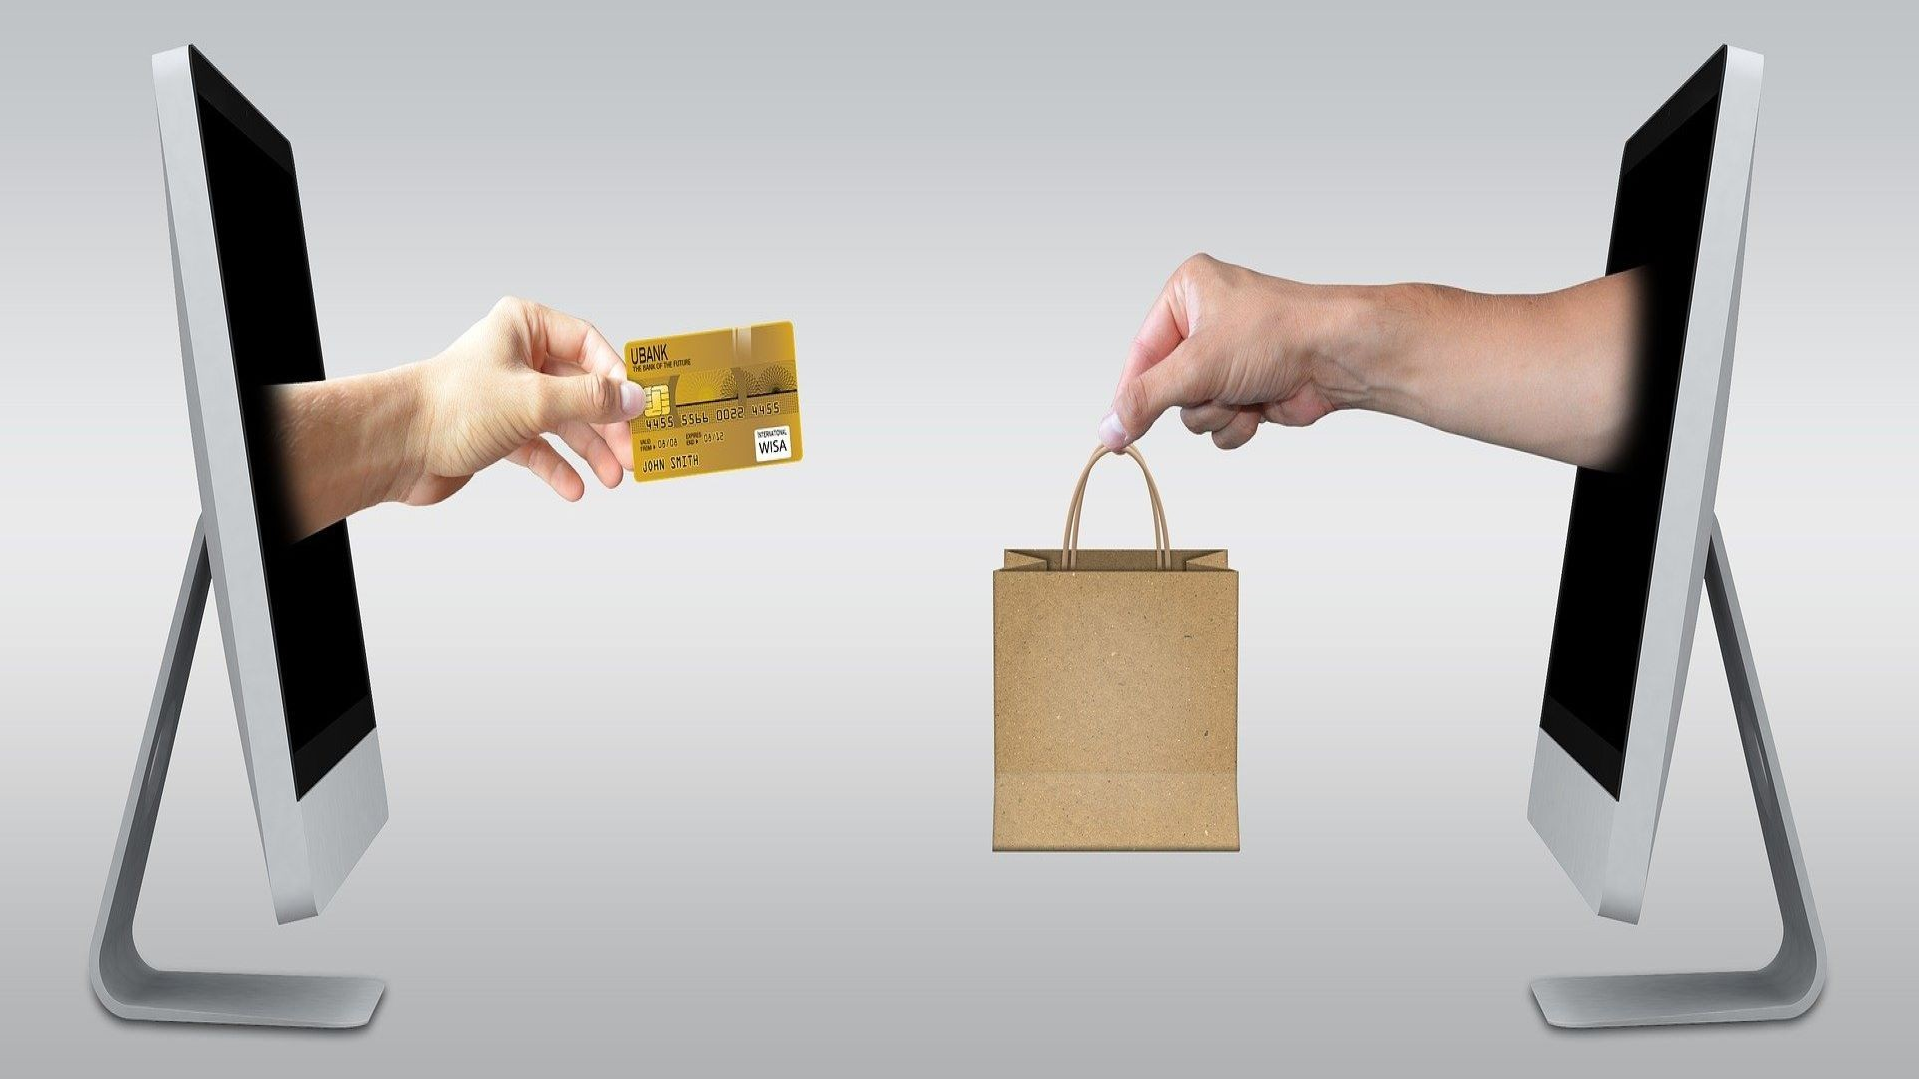 An image of two hands coming out of two seperate computer screens. One is holding a golden credit card, the other is holding a paper shopping bag.